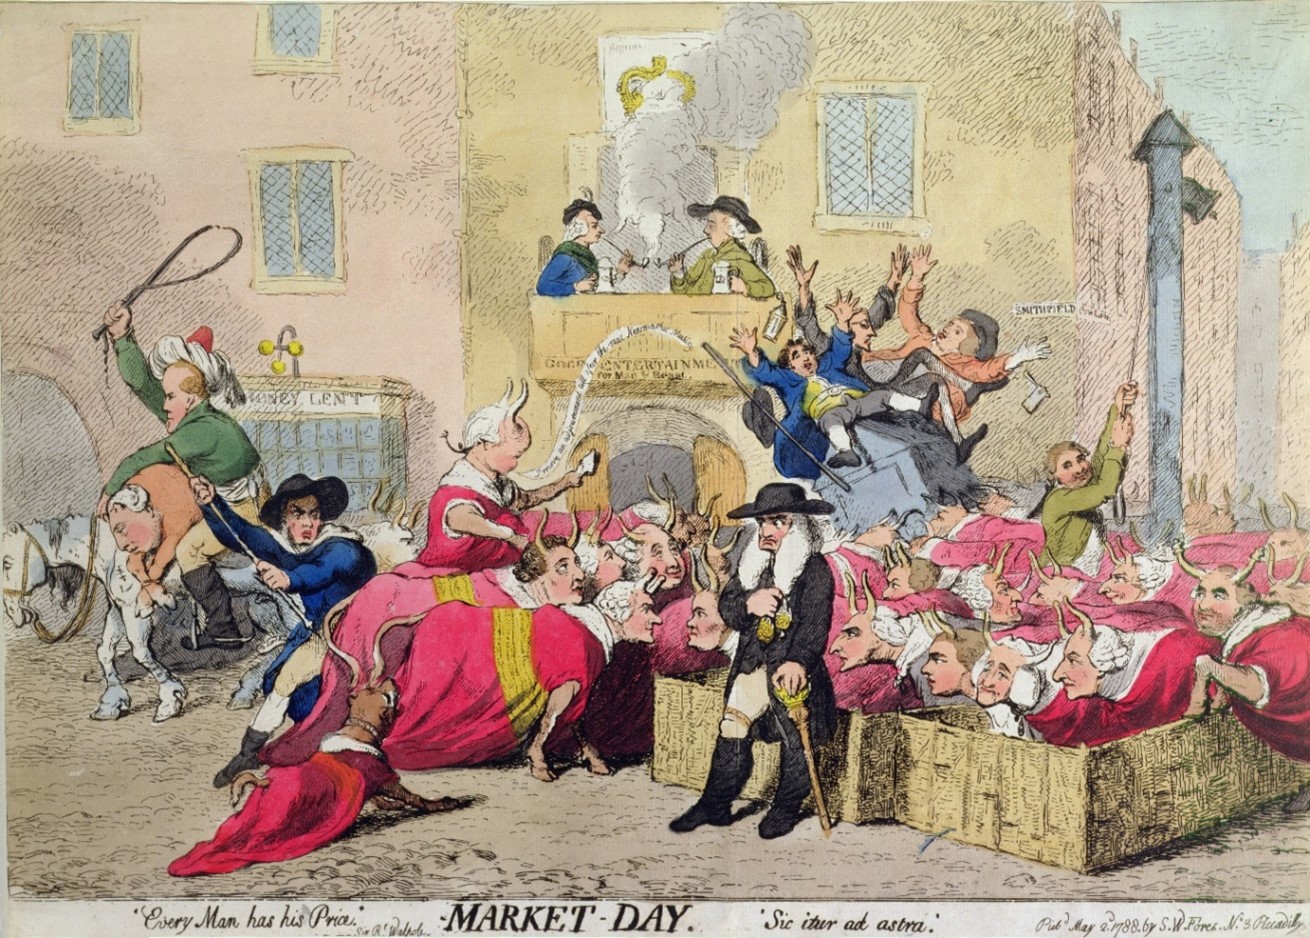 James Gillray, ‘Market Day’ (2 May 1788), New College, Oxford, NCO 190431